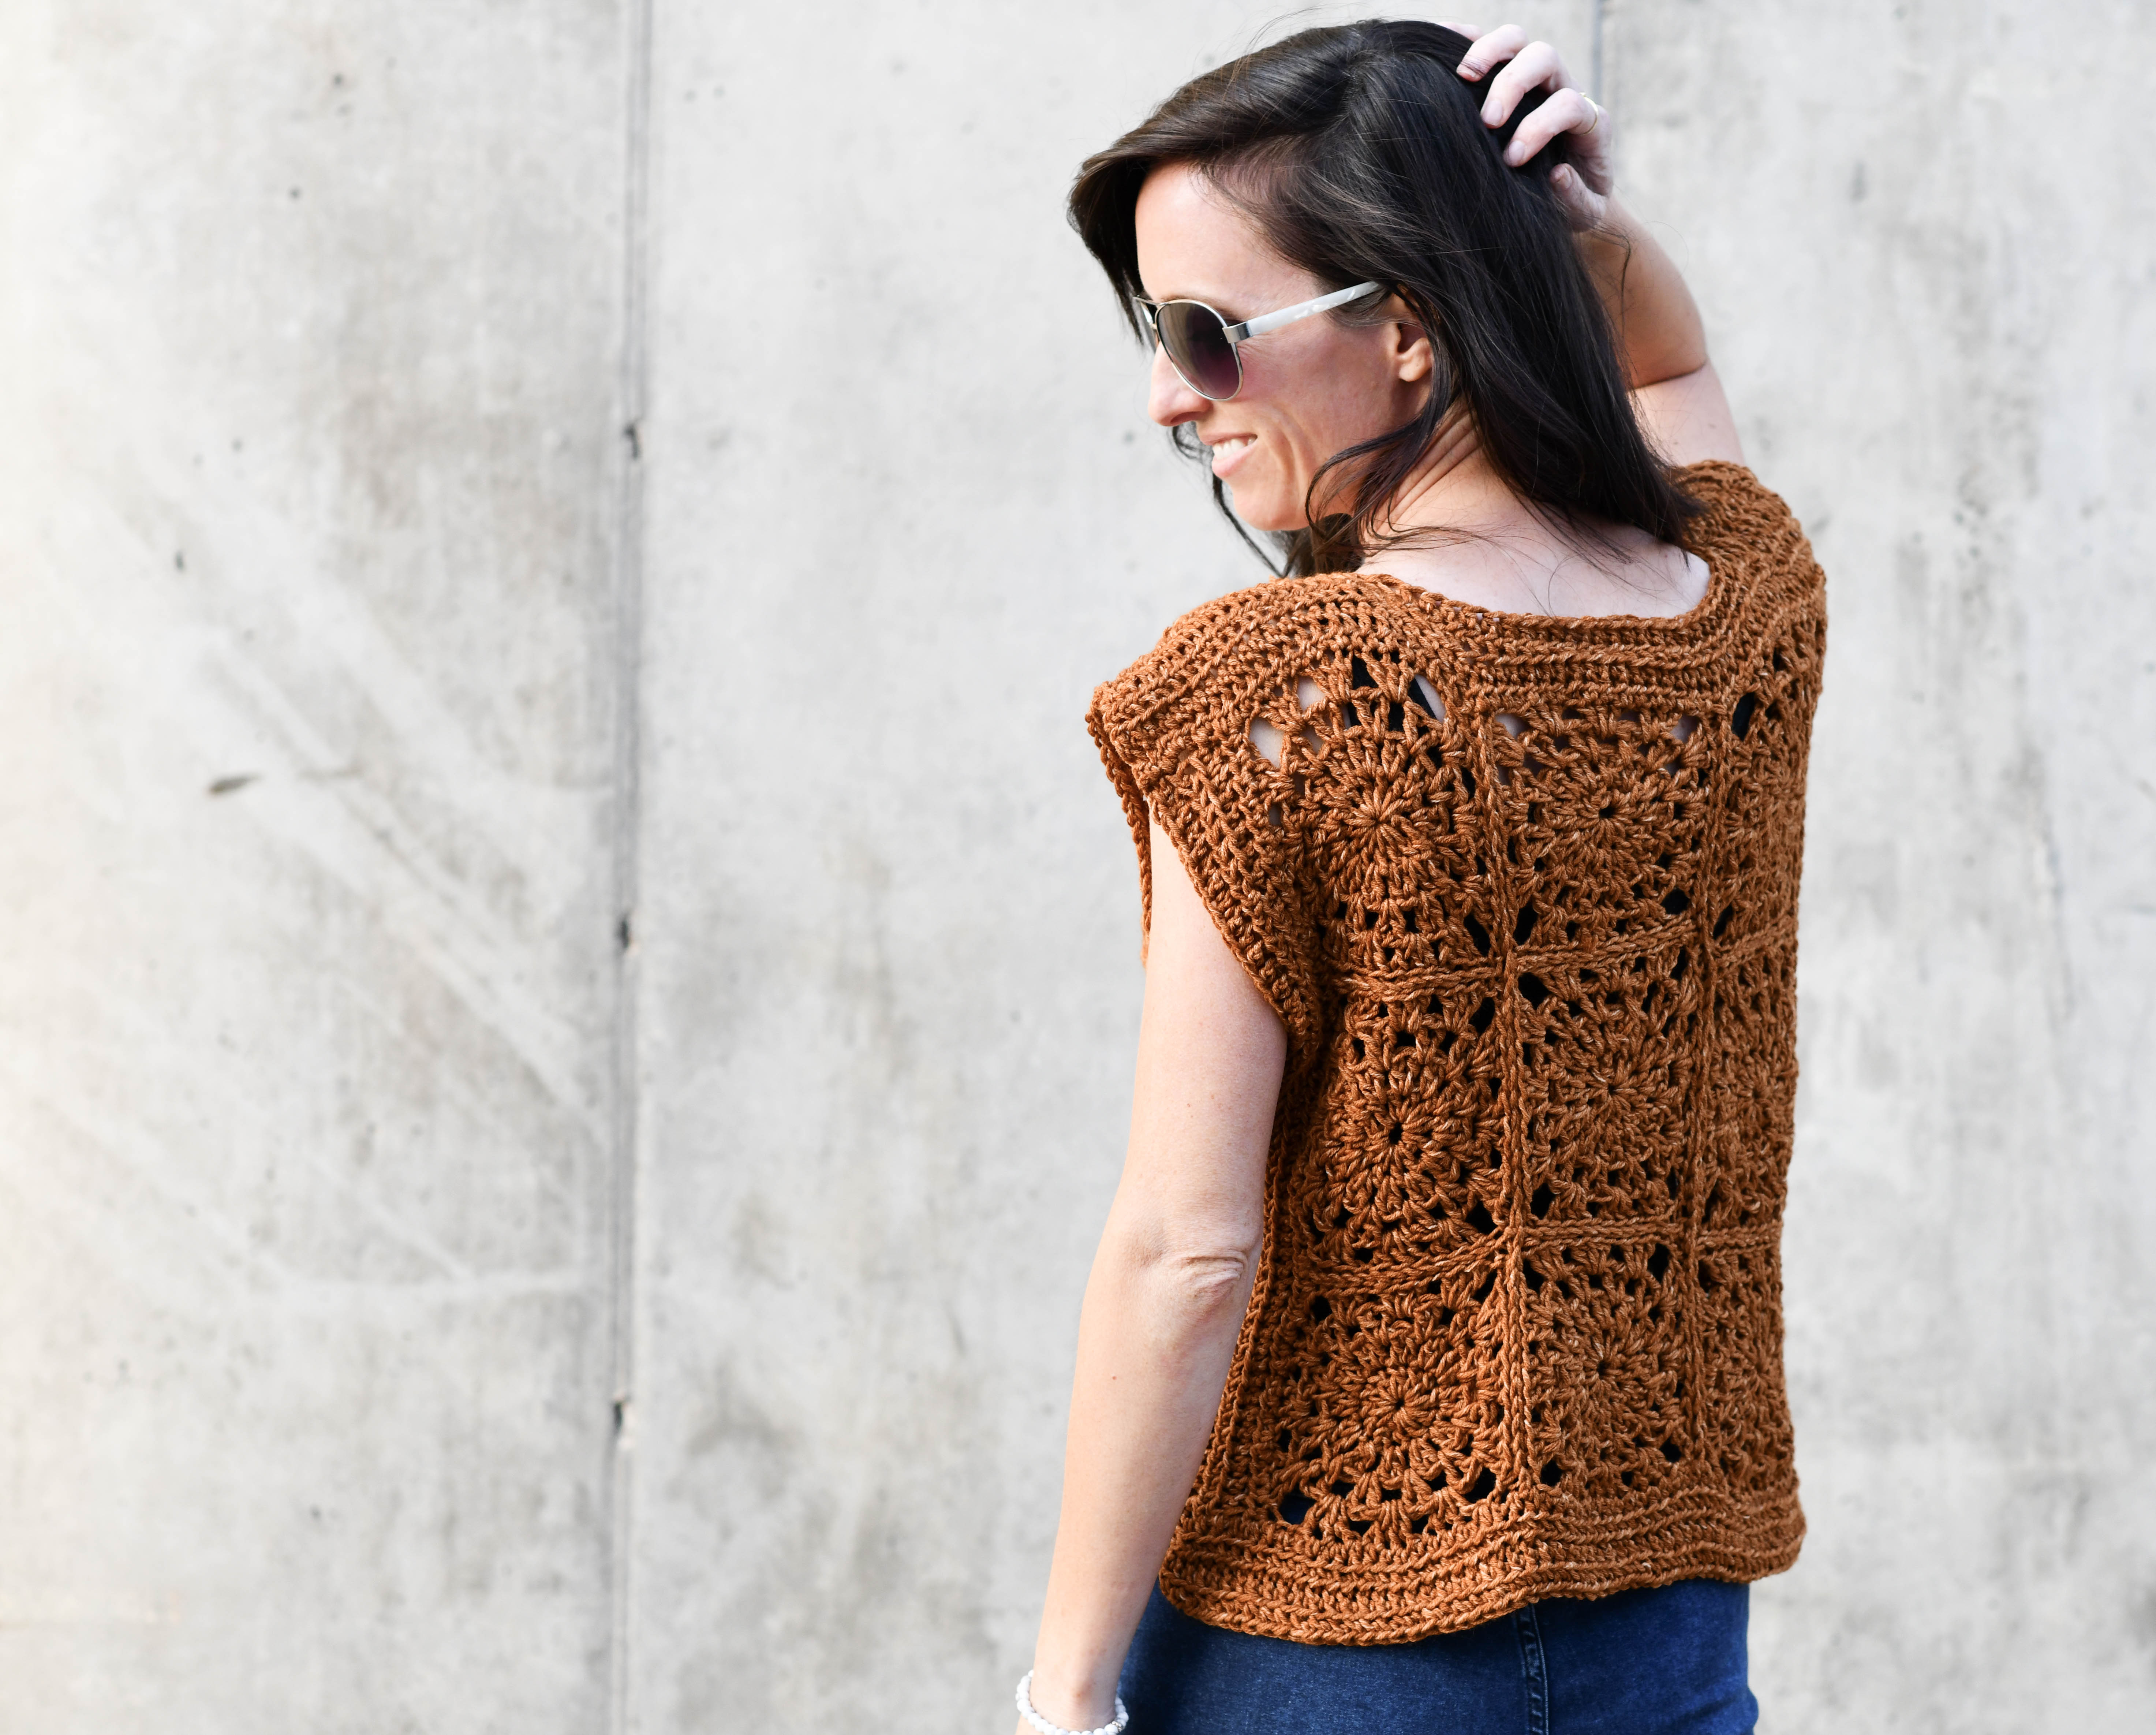 How To Crochet A Summer Boho Top - Free Pattern – Mama In A Stitch